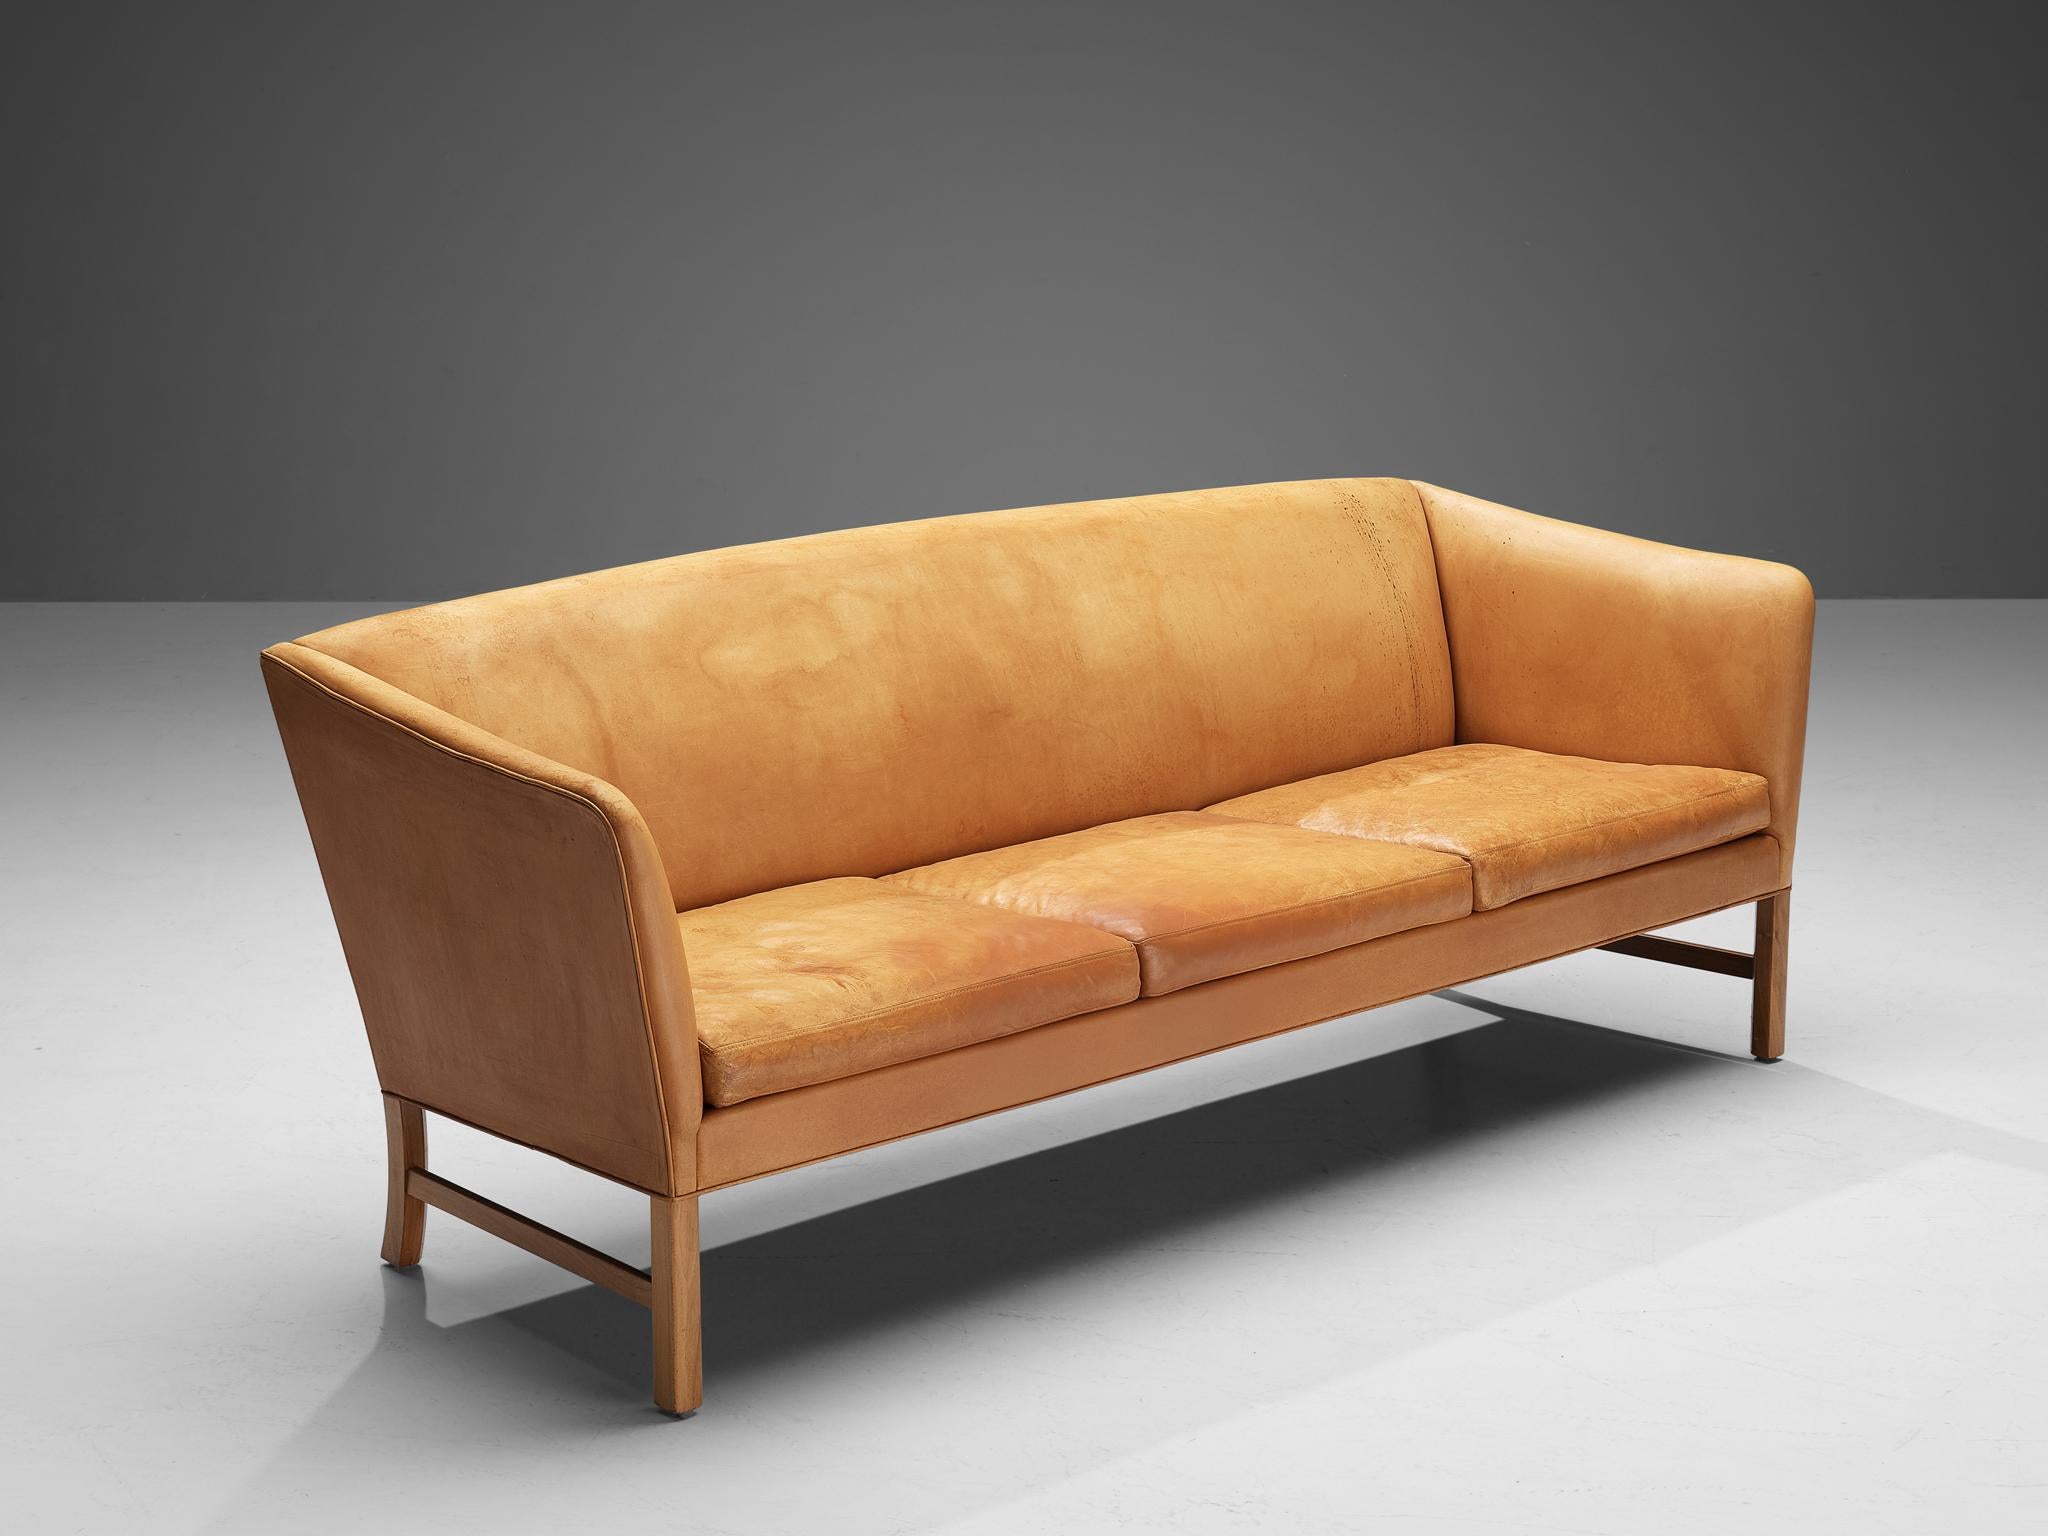 Ole Wanscher for A.J. Iverseren, sofa, leather, walnut, Denmark, 1950s/1960s

Beautiful sofa in an outstanding natural color designed by Ole Wanscher during the mid-century period. This piece is upholstered in smooth camel brown leather, providing